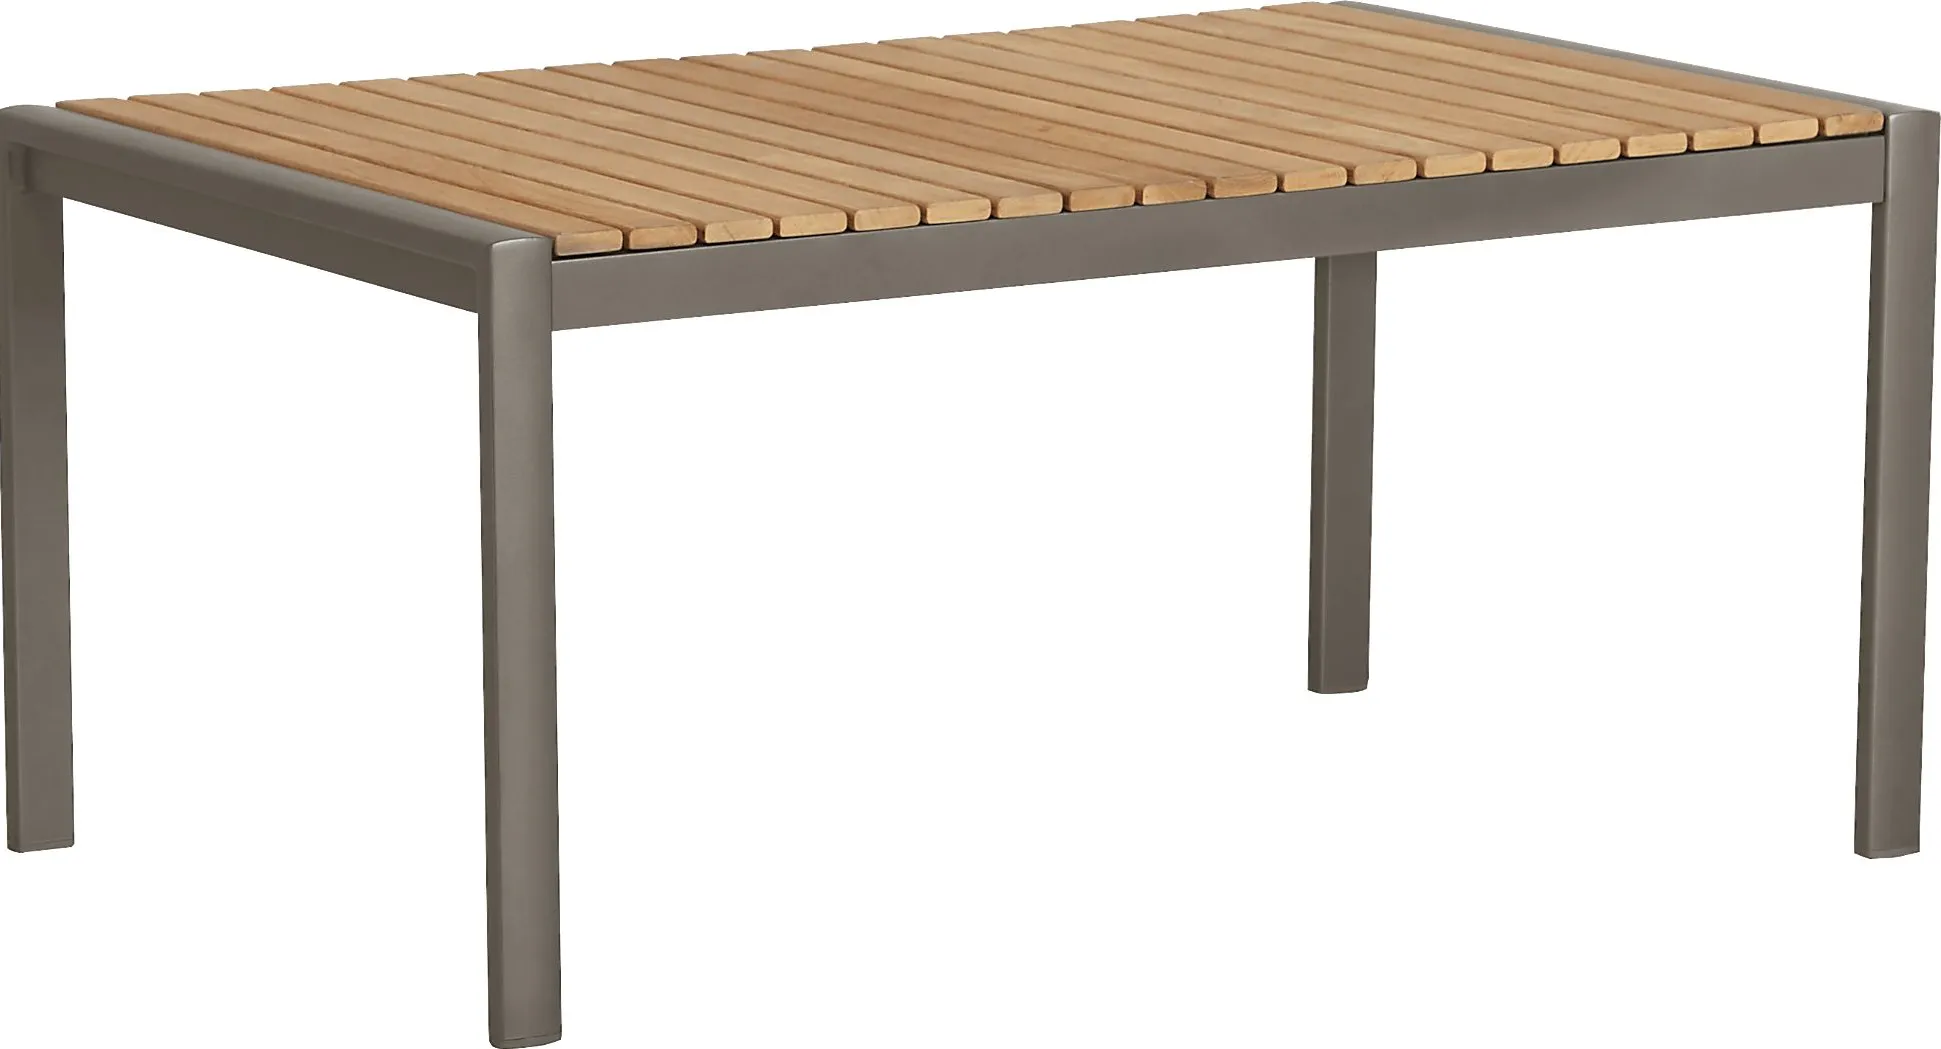 Ocean Tide Gray Outdoor Cocktail Table